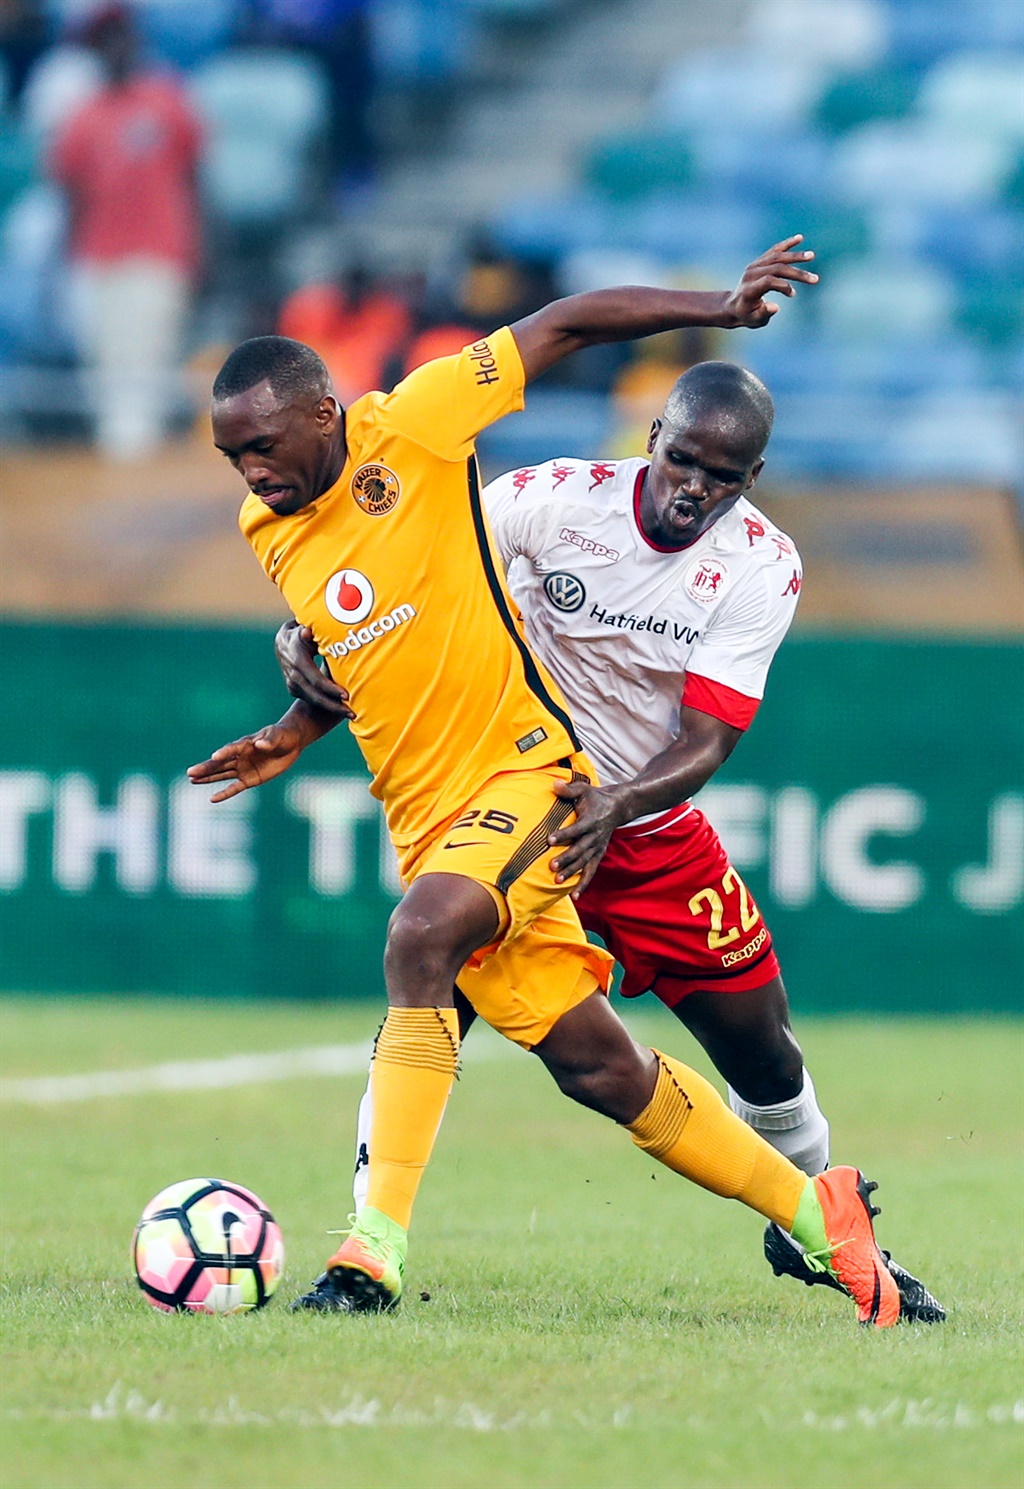 Zamuxolo Ngalo of Highlands Park with a tackle on Bernard Parker of Kaizer Chiefs during the Absa Premiership match between Kaizer Chiefs and Highlands Park at Moses Mabhida Stadium on February 18, 2017 in Durban, South Africa.